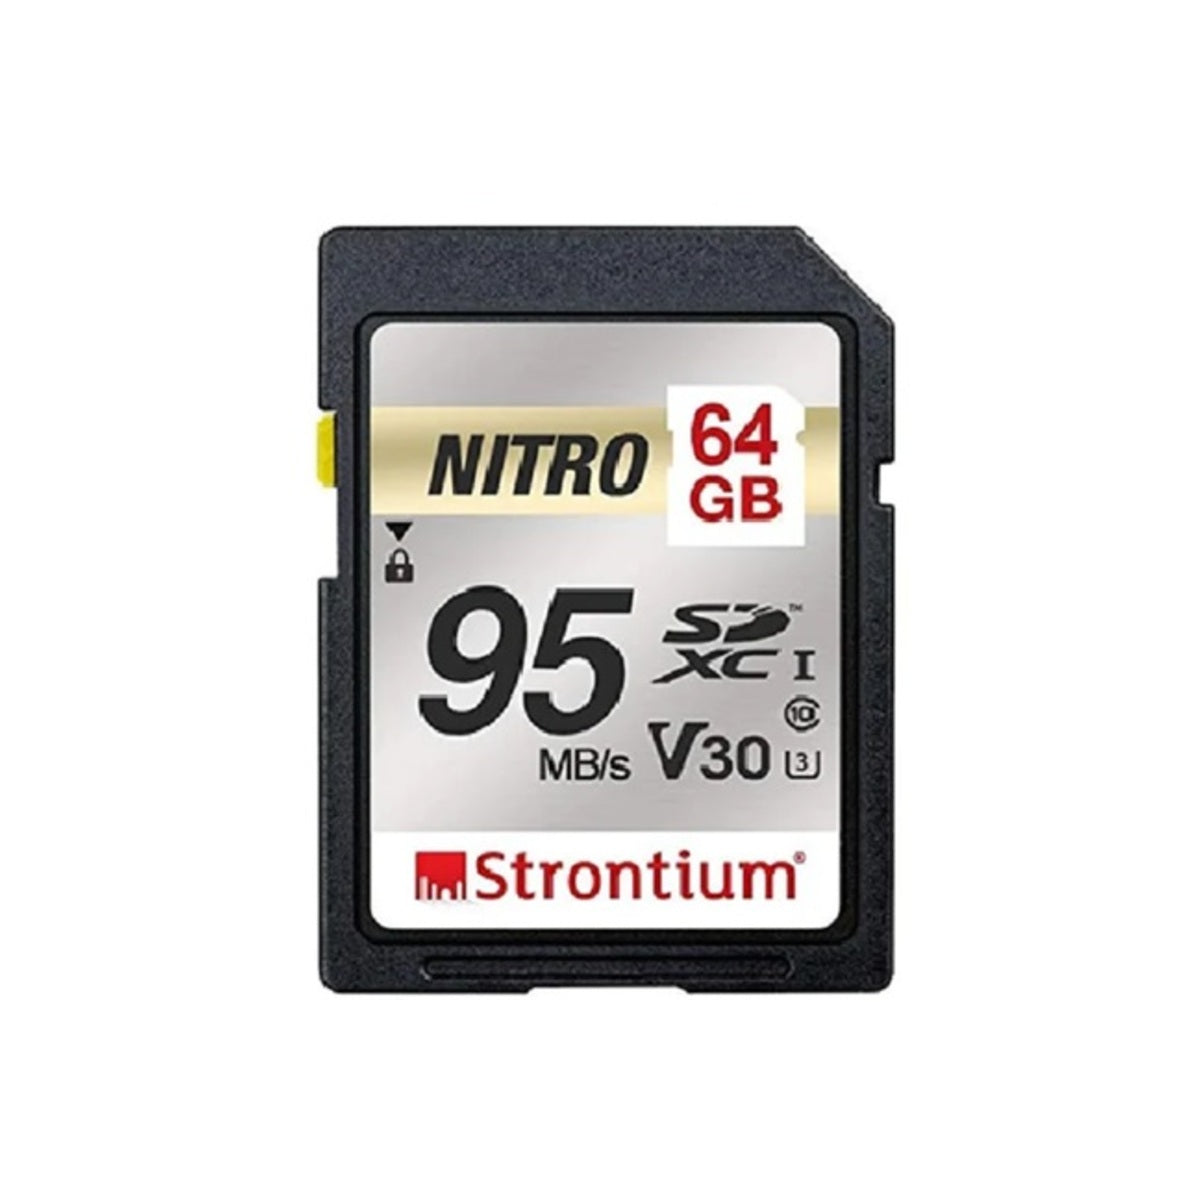 Strontium Nitro SD Card 95MB/s 64GB for Smartphones/Tablets/DSLRs